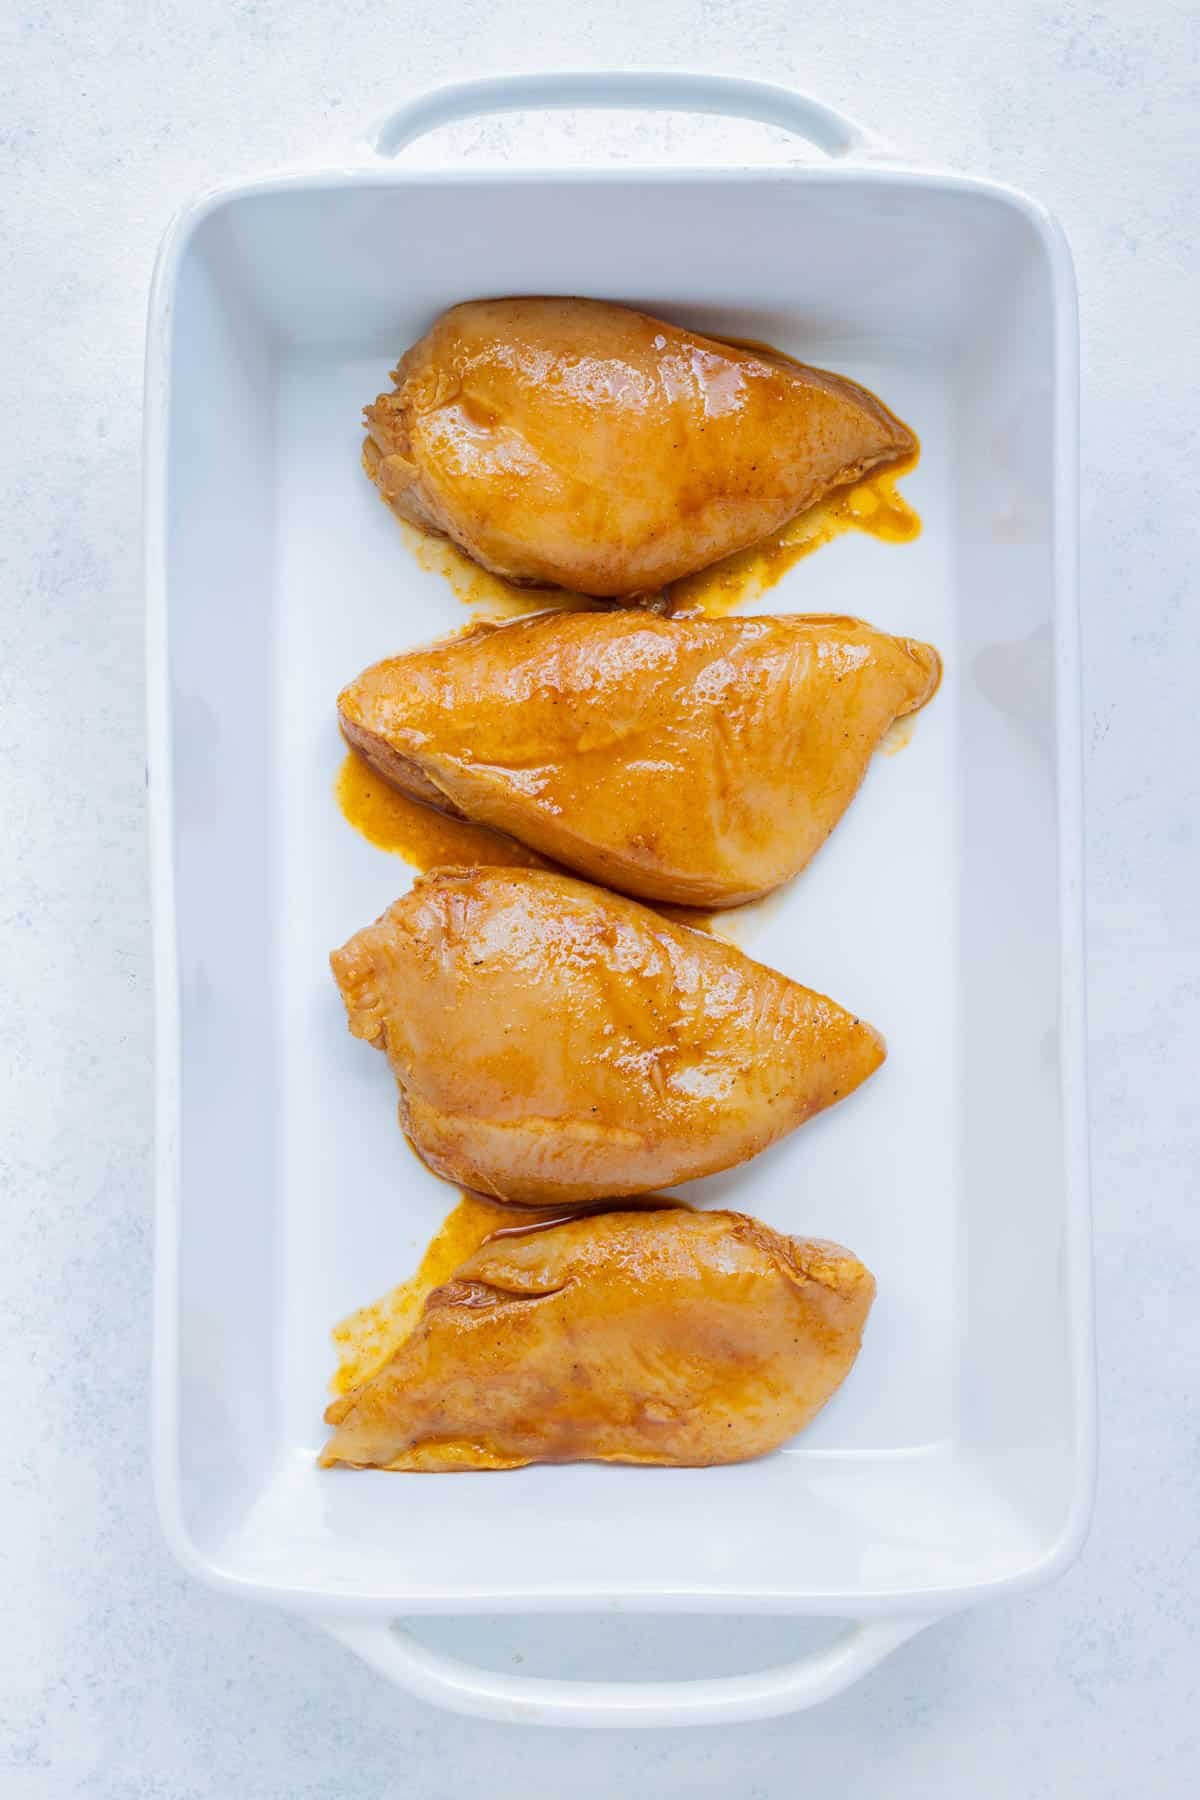 Marinated chicken breasts are laid flat in a baking dish.